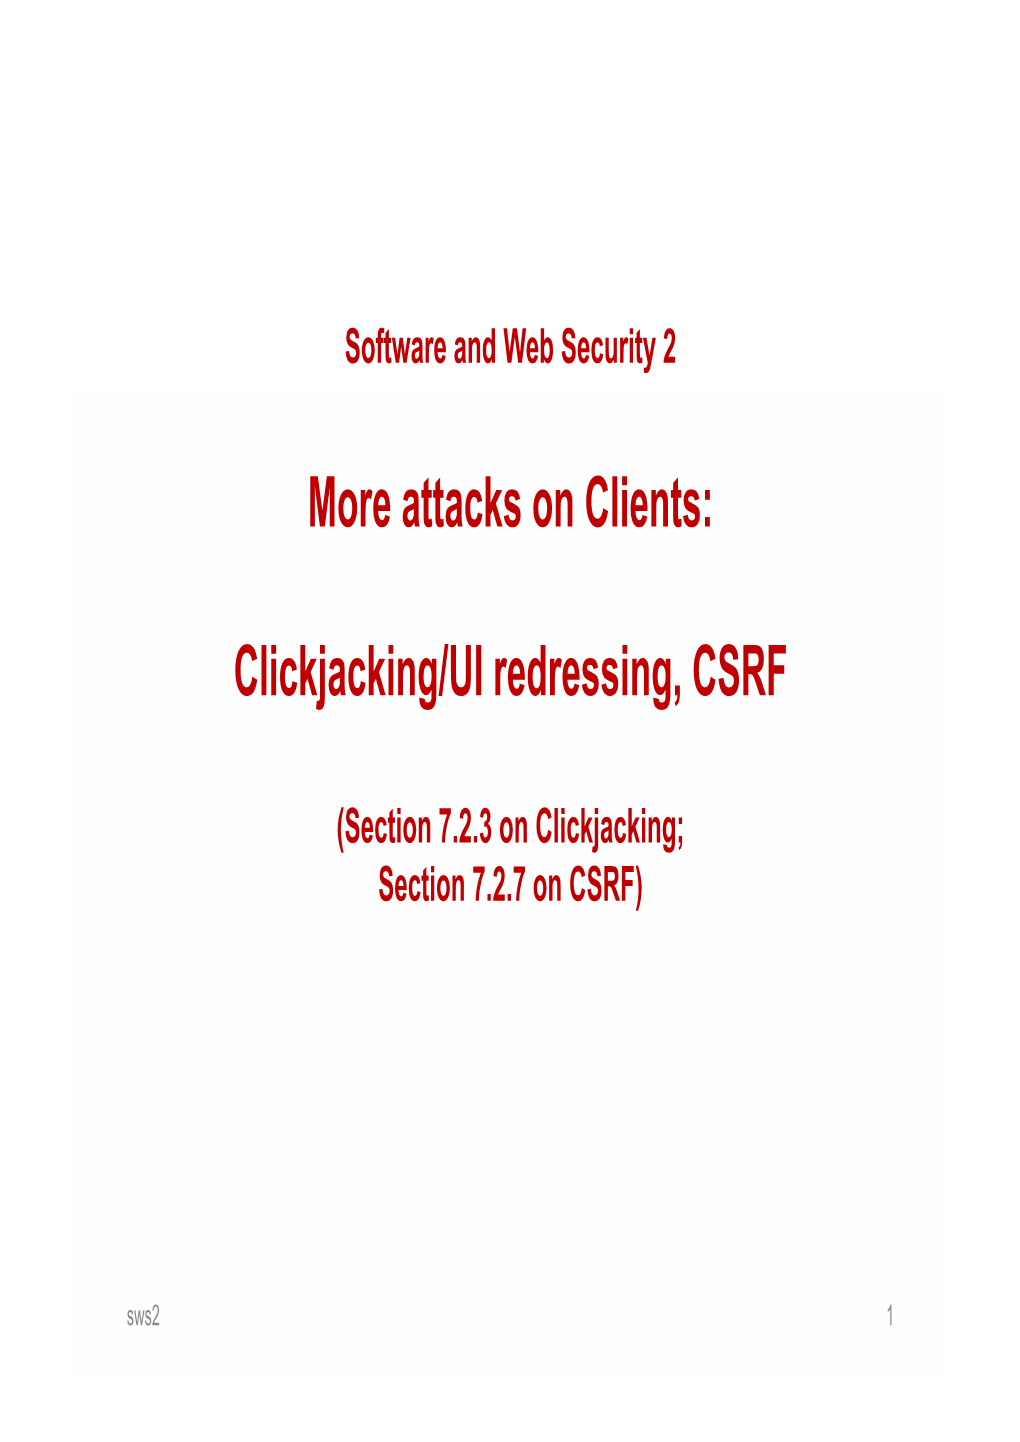 More Attacks on Clients: Clickjacking/UI Redressing, CSRF